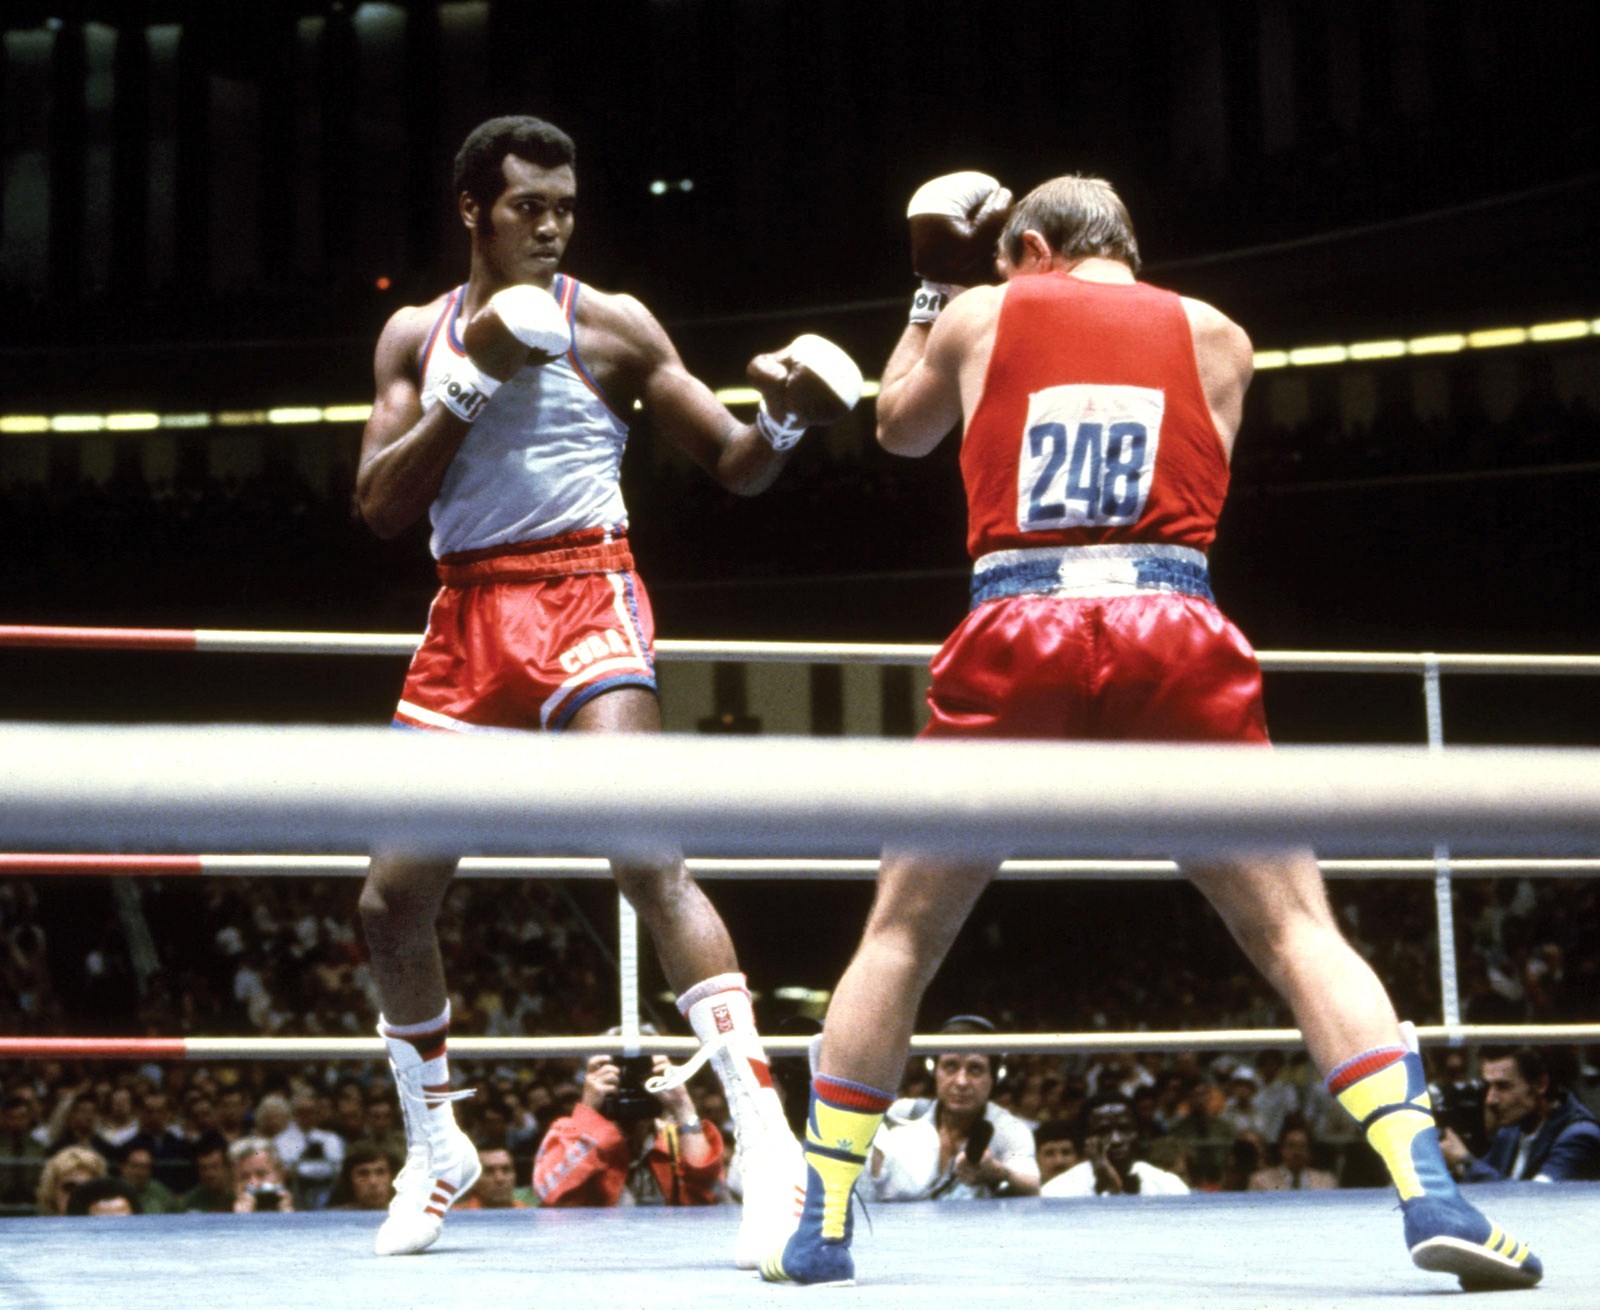 Winners in boxing at the Olimpiisky Sports Complex in Moscow 1980 included Cuba's Teofilo Stevenson, who a third consecutive gold medal in the heavyweight division ©Hulton Archive/Getty Images